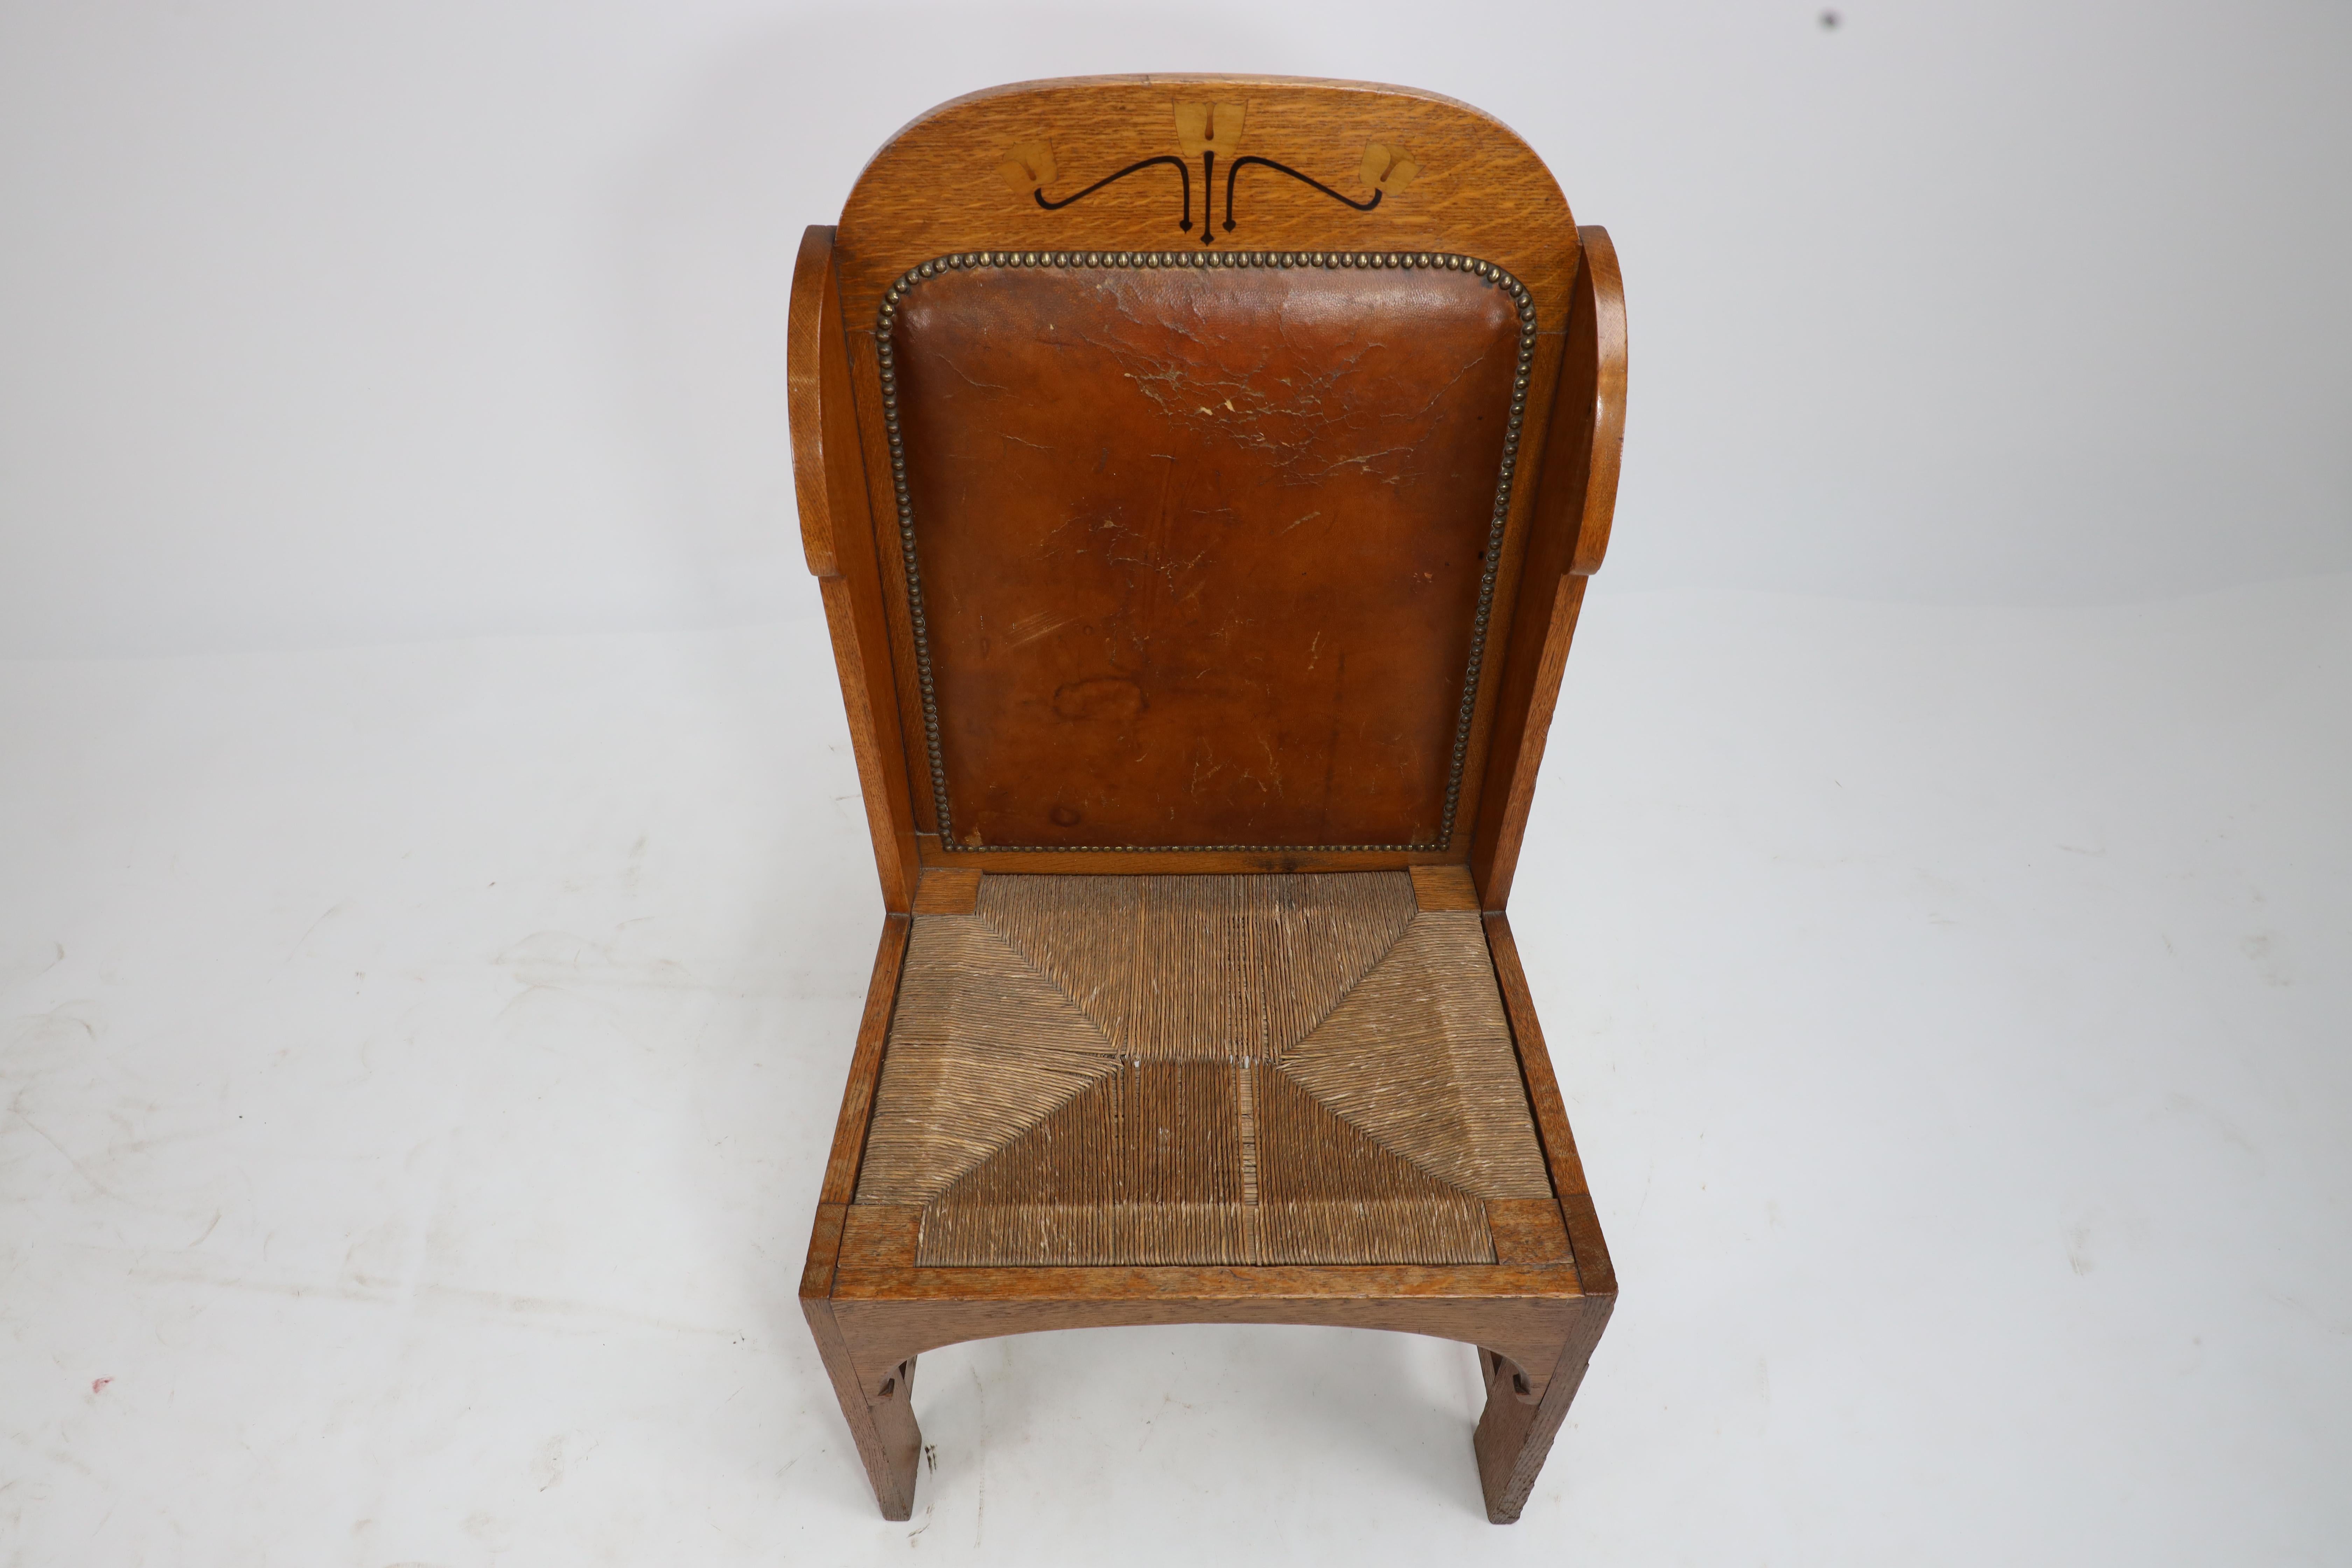 Early 20th Century E G Punnet attributed. Probably made by William Birch. An oak wing back chair For Sale